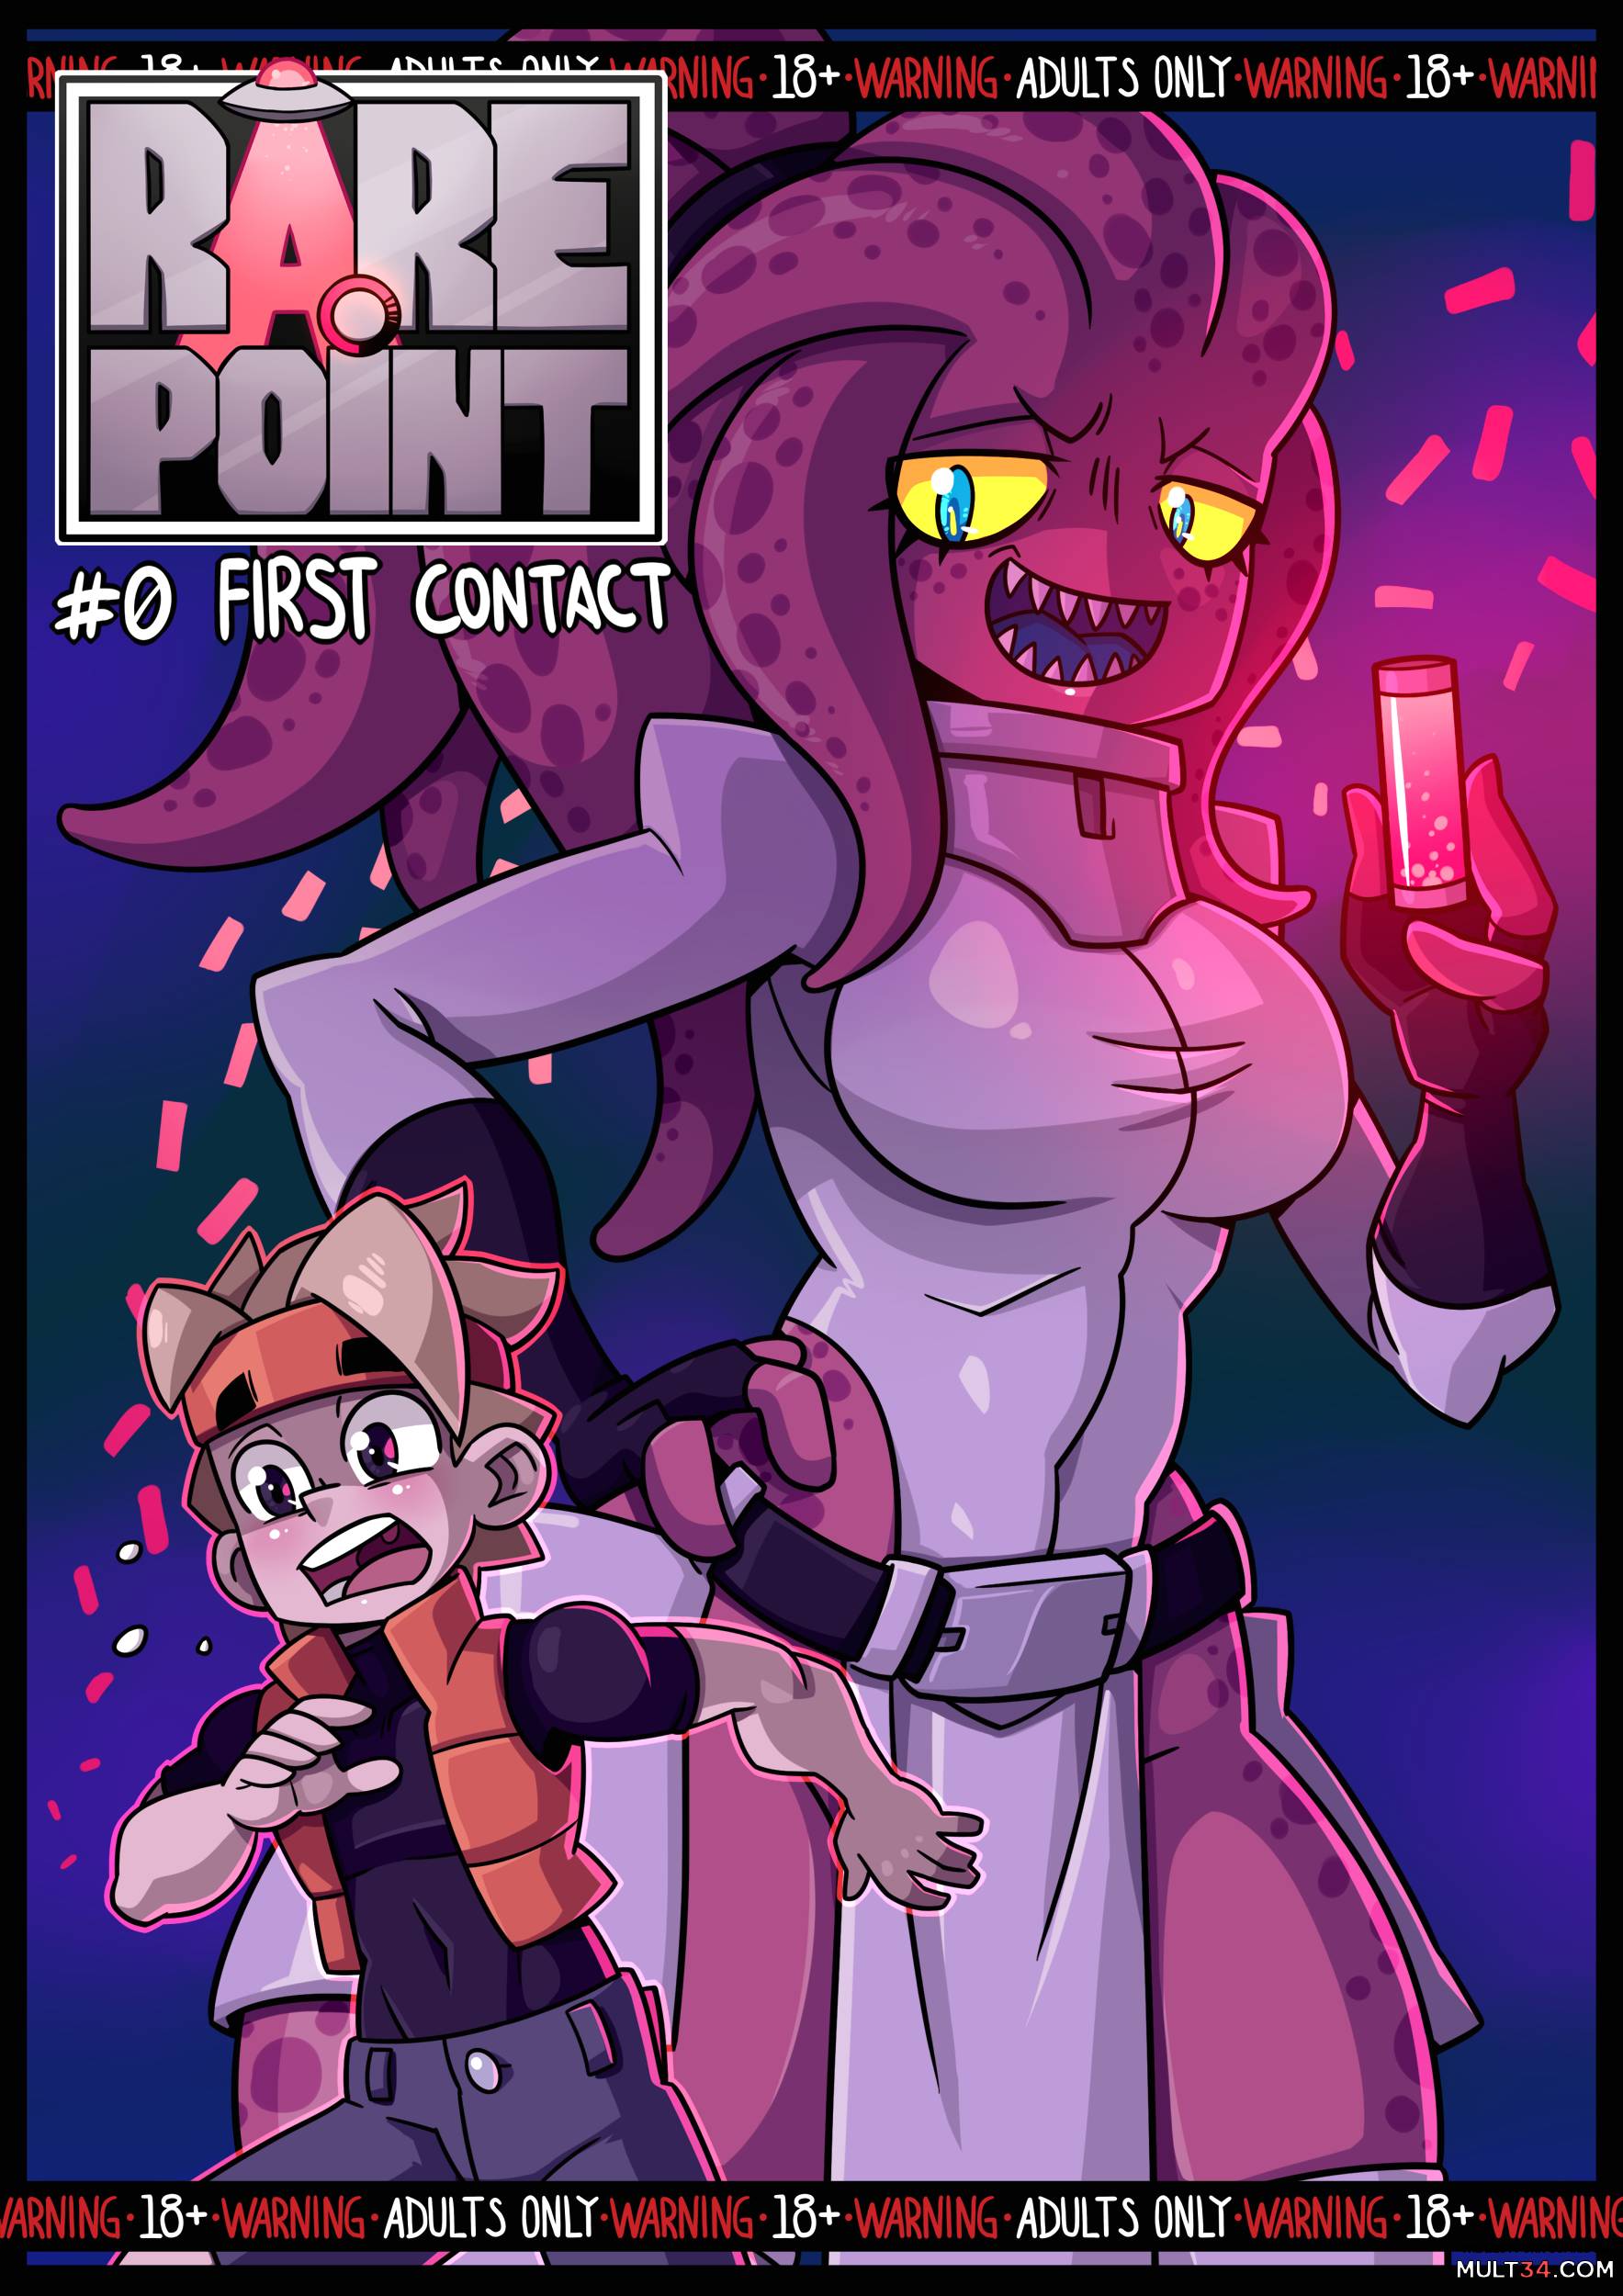 RarePoint 0: First Contact page 1